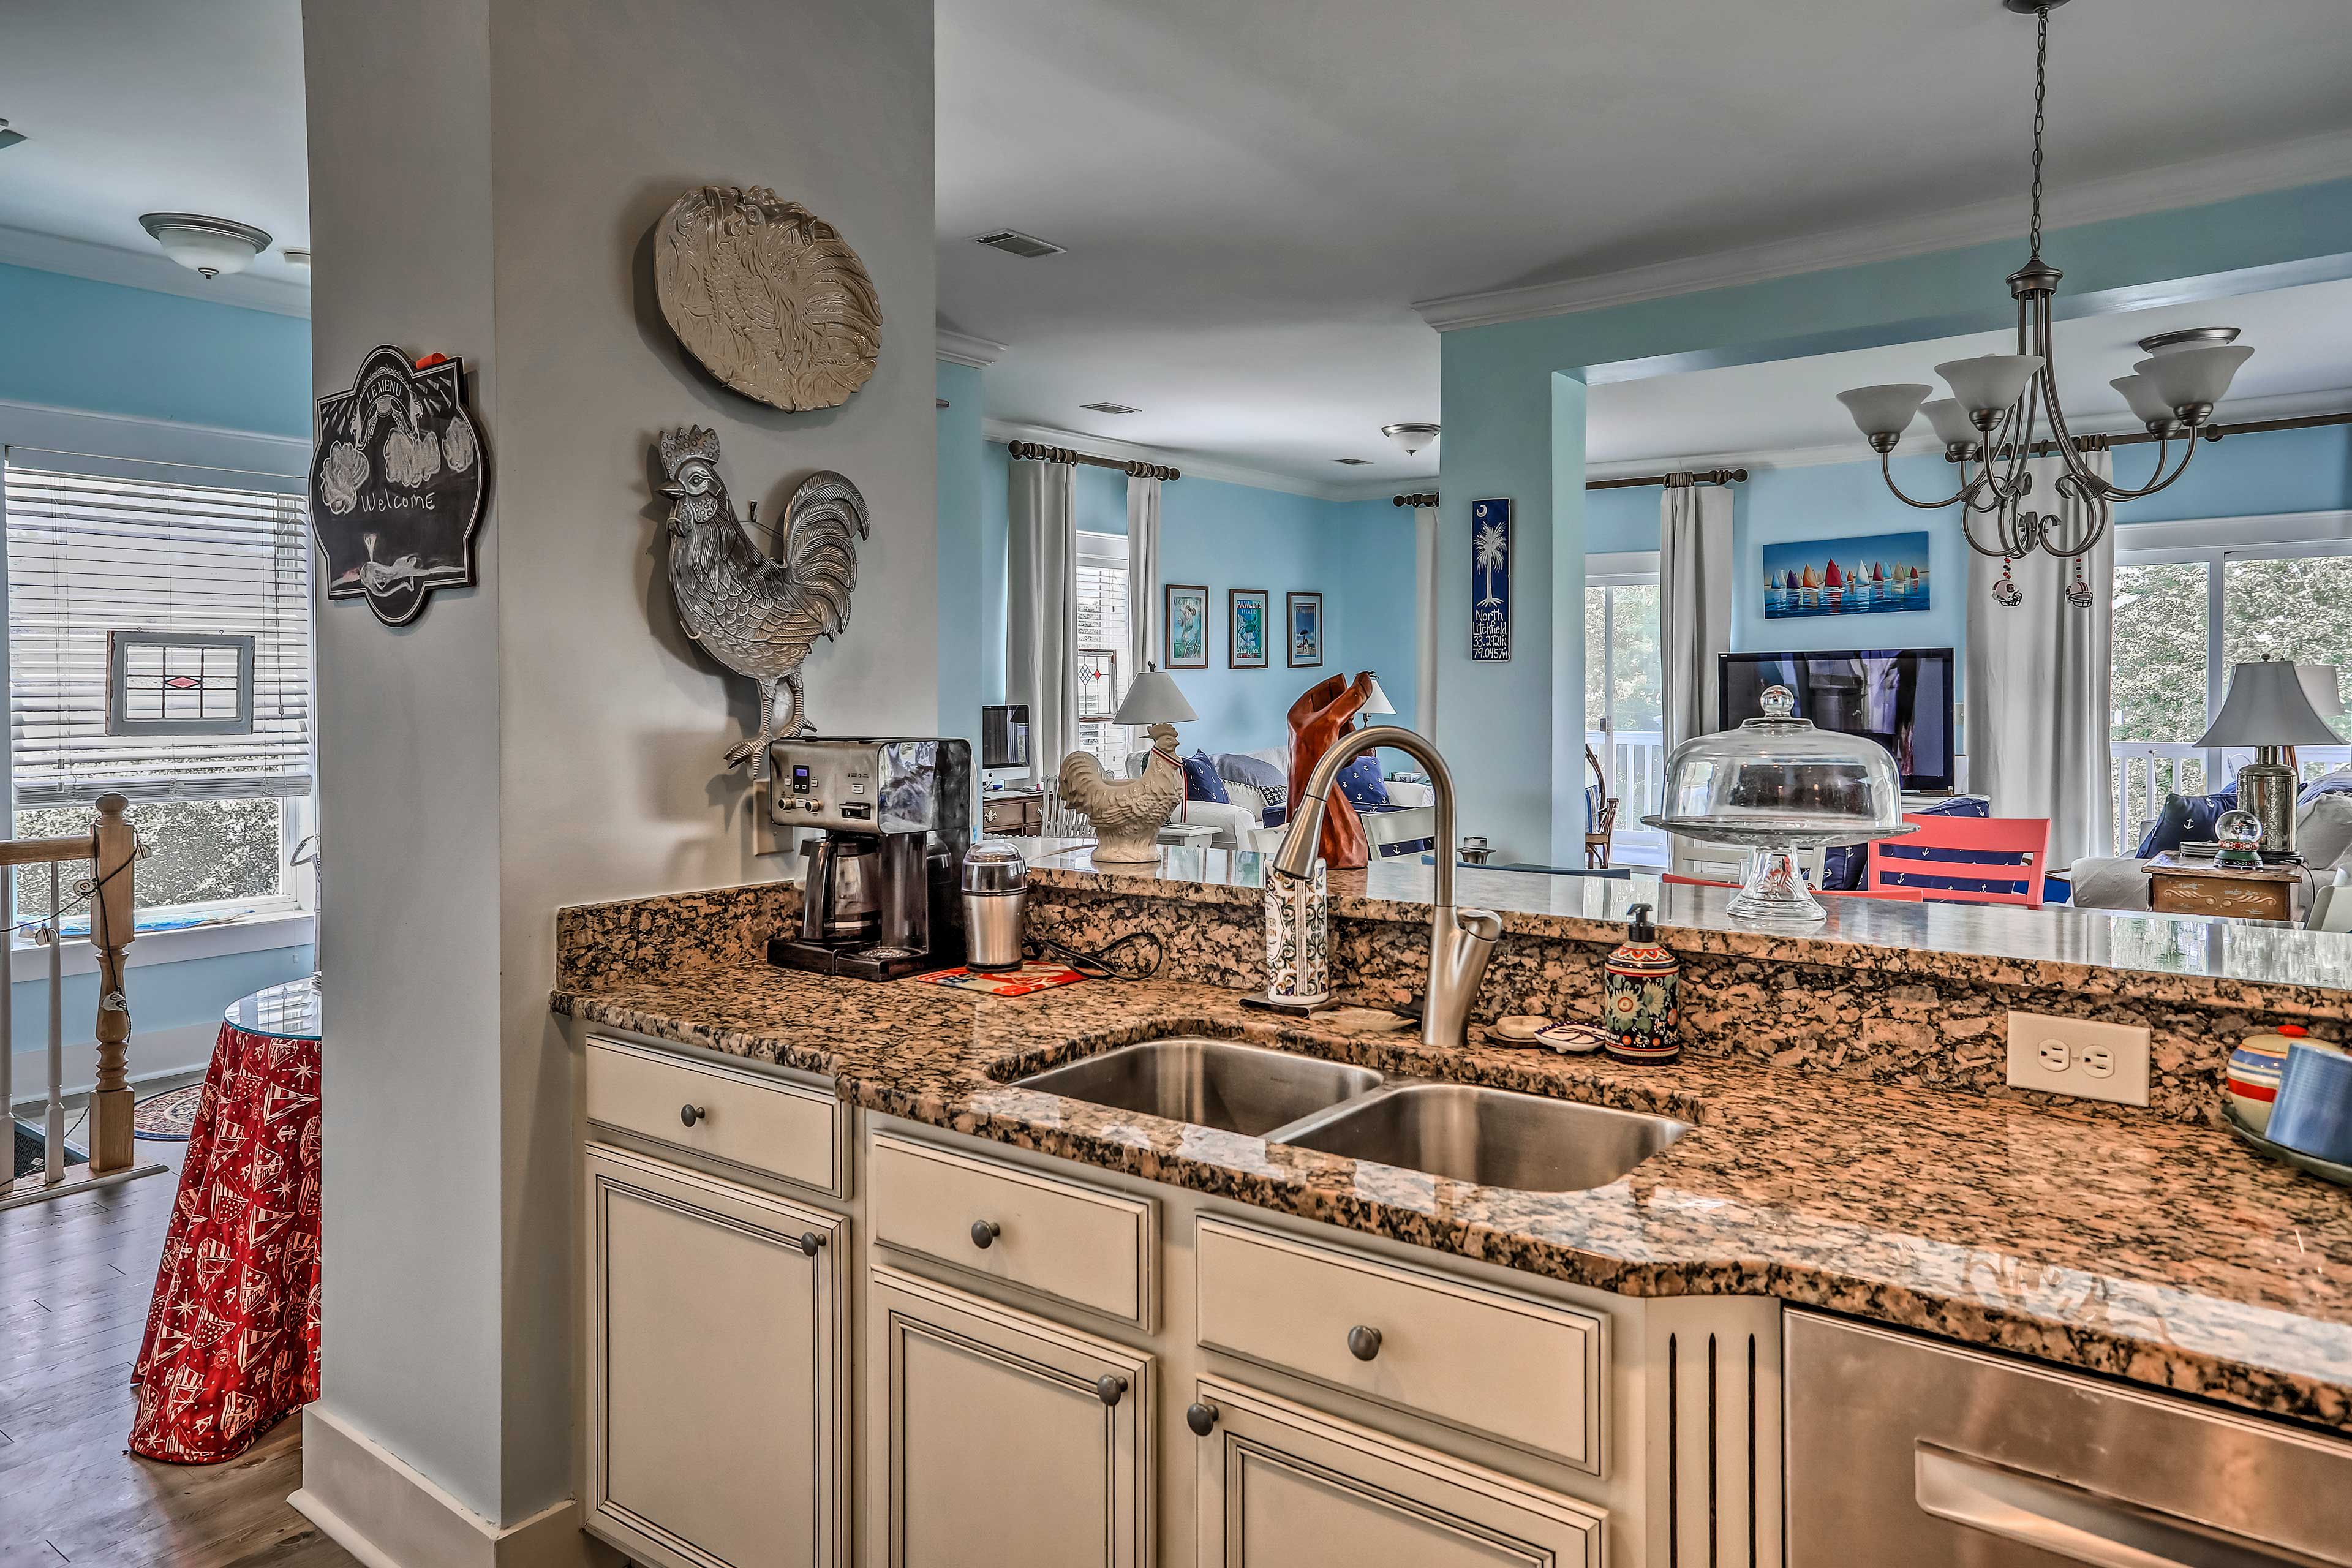 The full kitchen boasts granite counters and overlooks the living area.